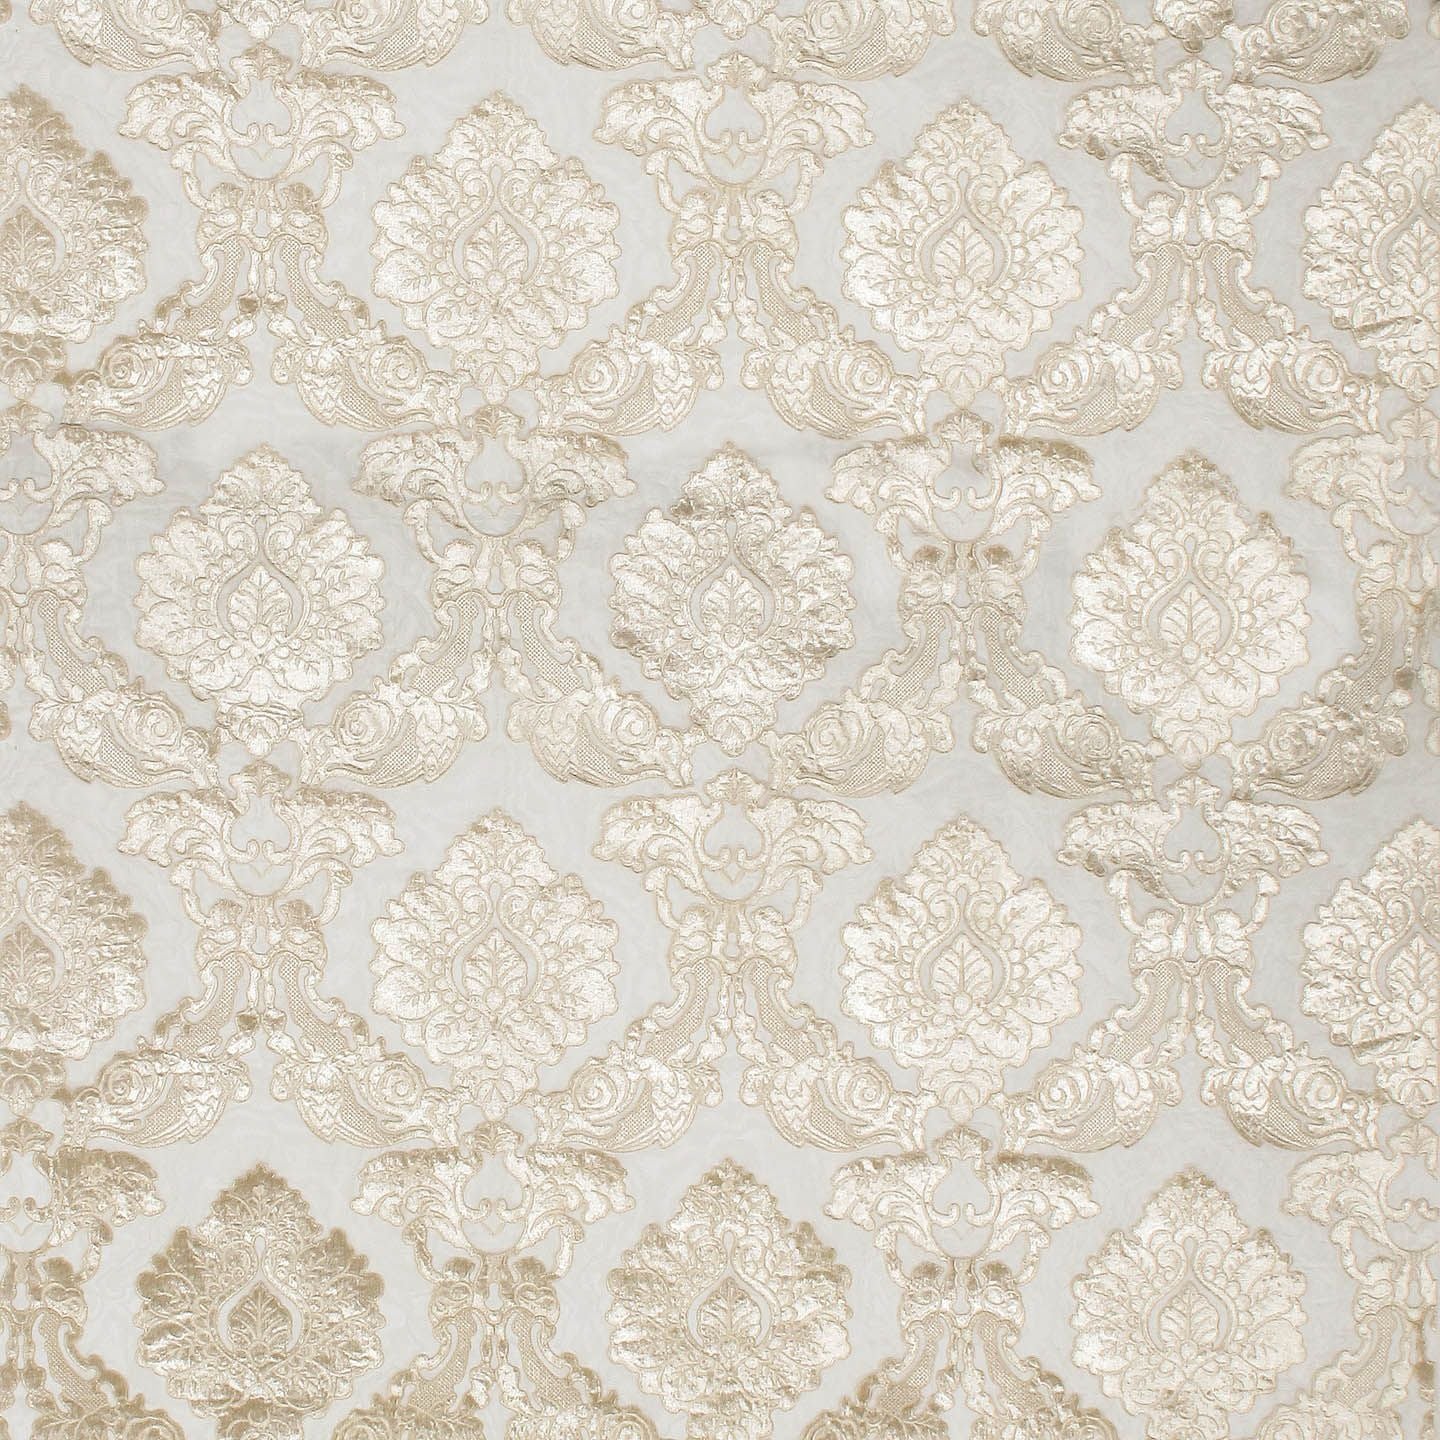 Castellet Sheer fabric in ivory color - pattern number HC 0003CAST - by Scalamandre in the Old World Weavers collection